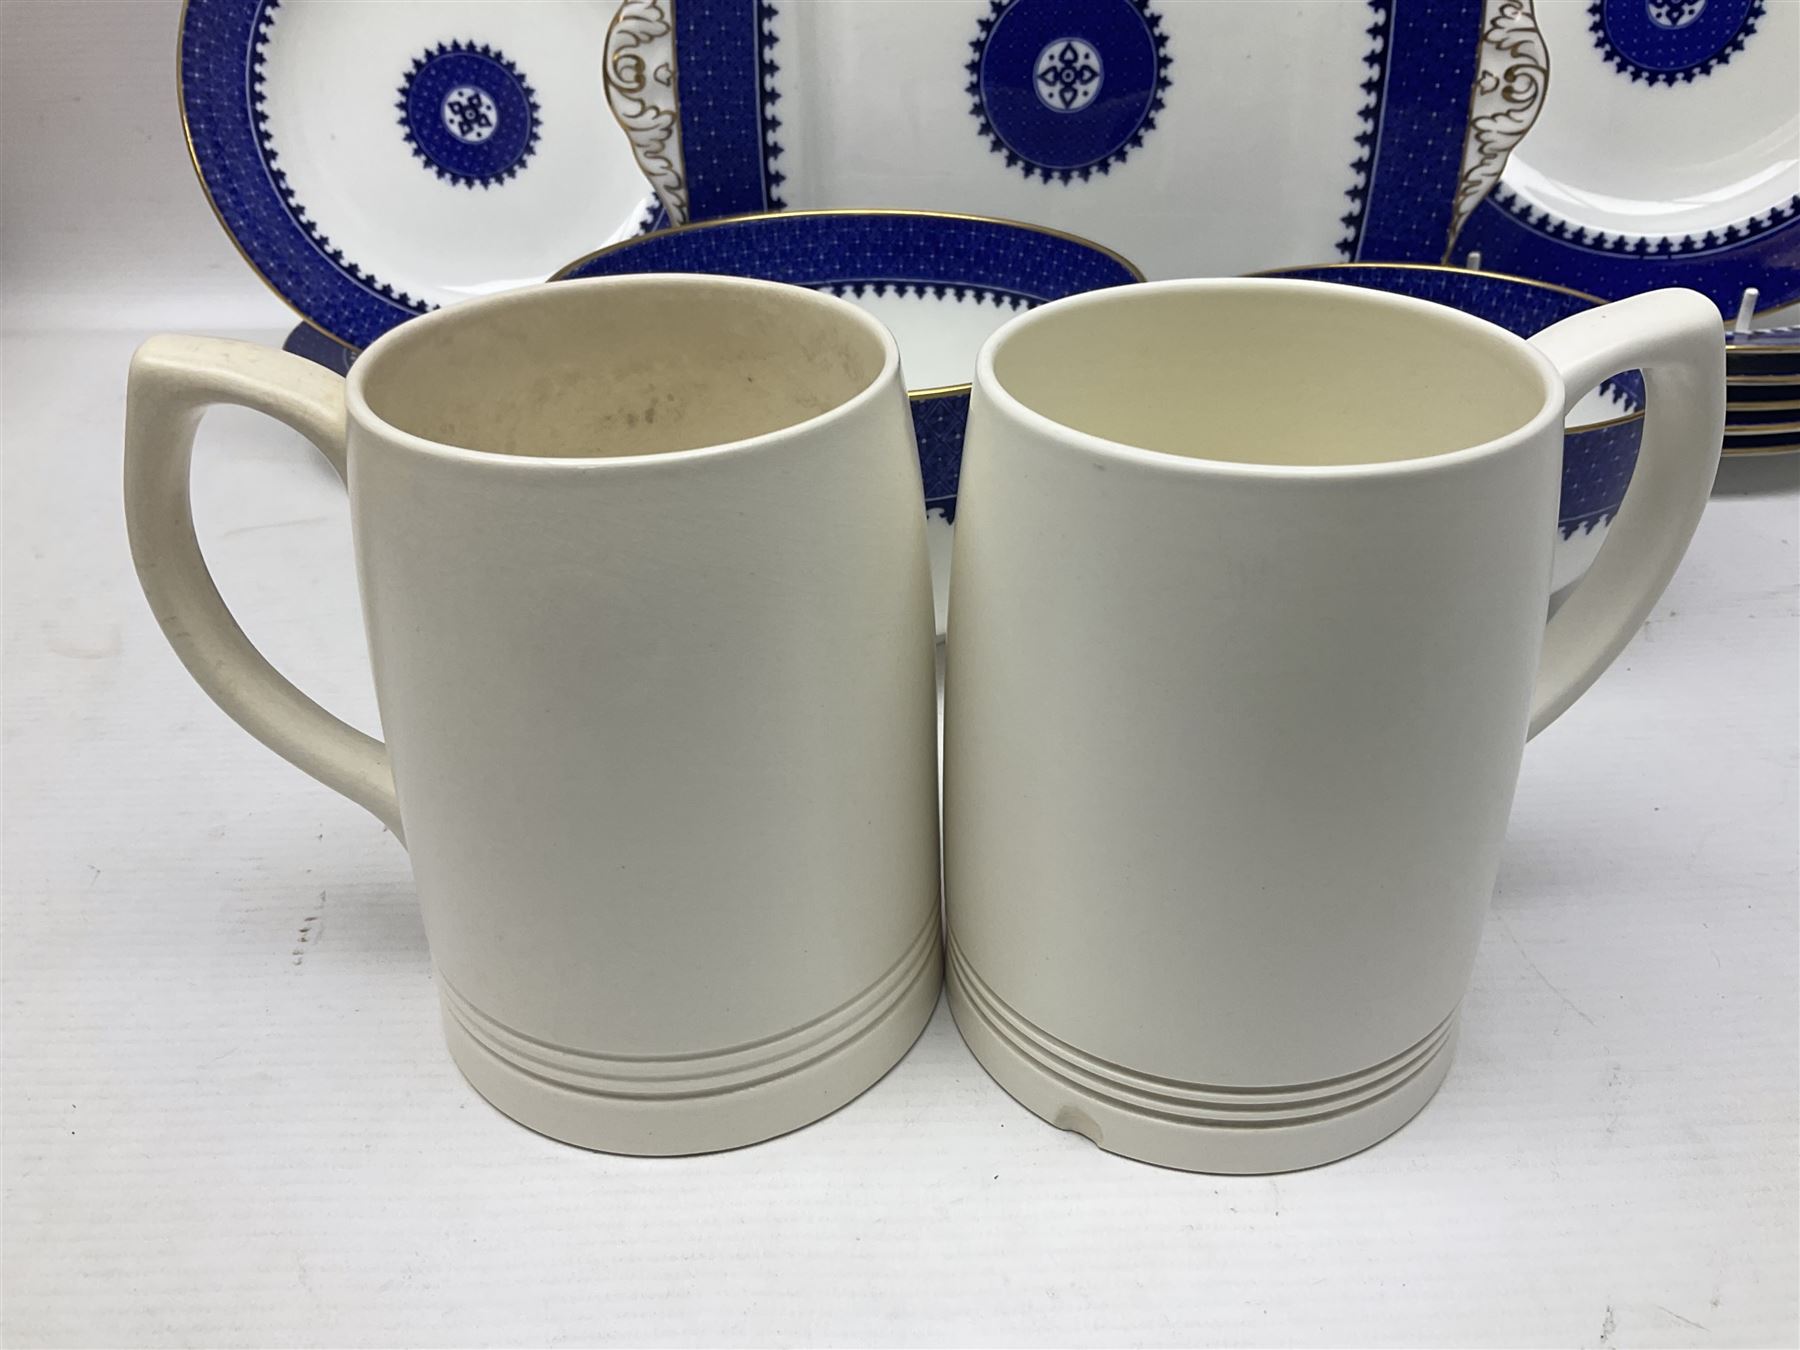 Two Wedgwood Keith Murray tankards and a Wedgwood blue and white part coffee service - Image 6 of 7